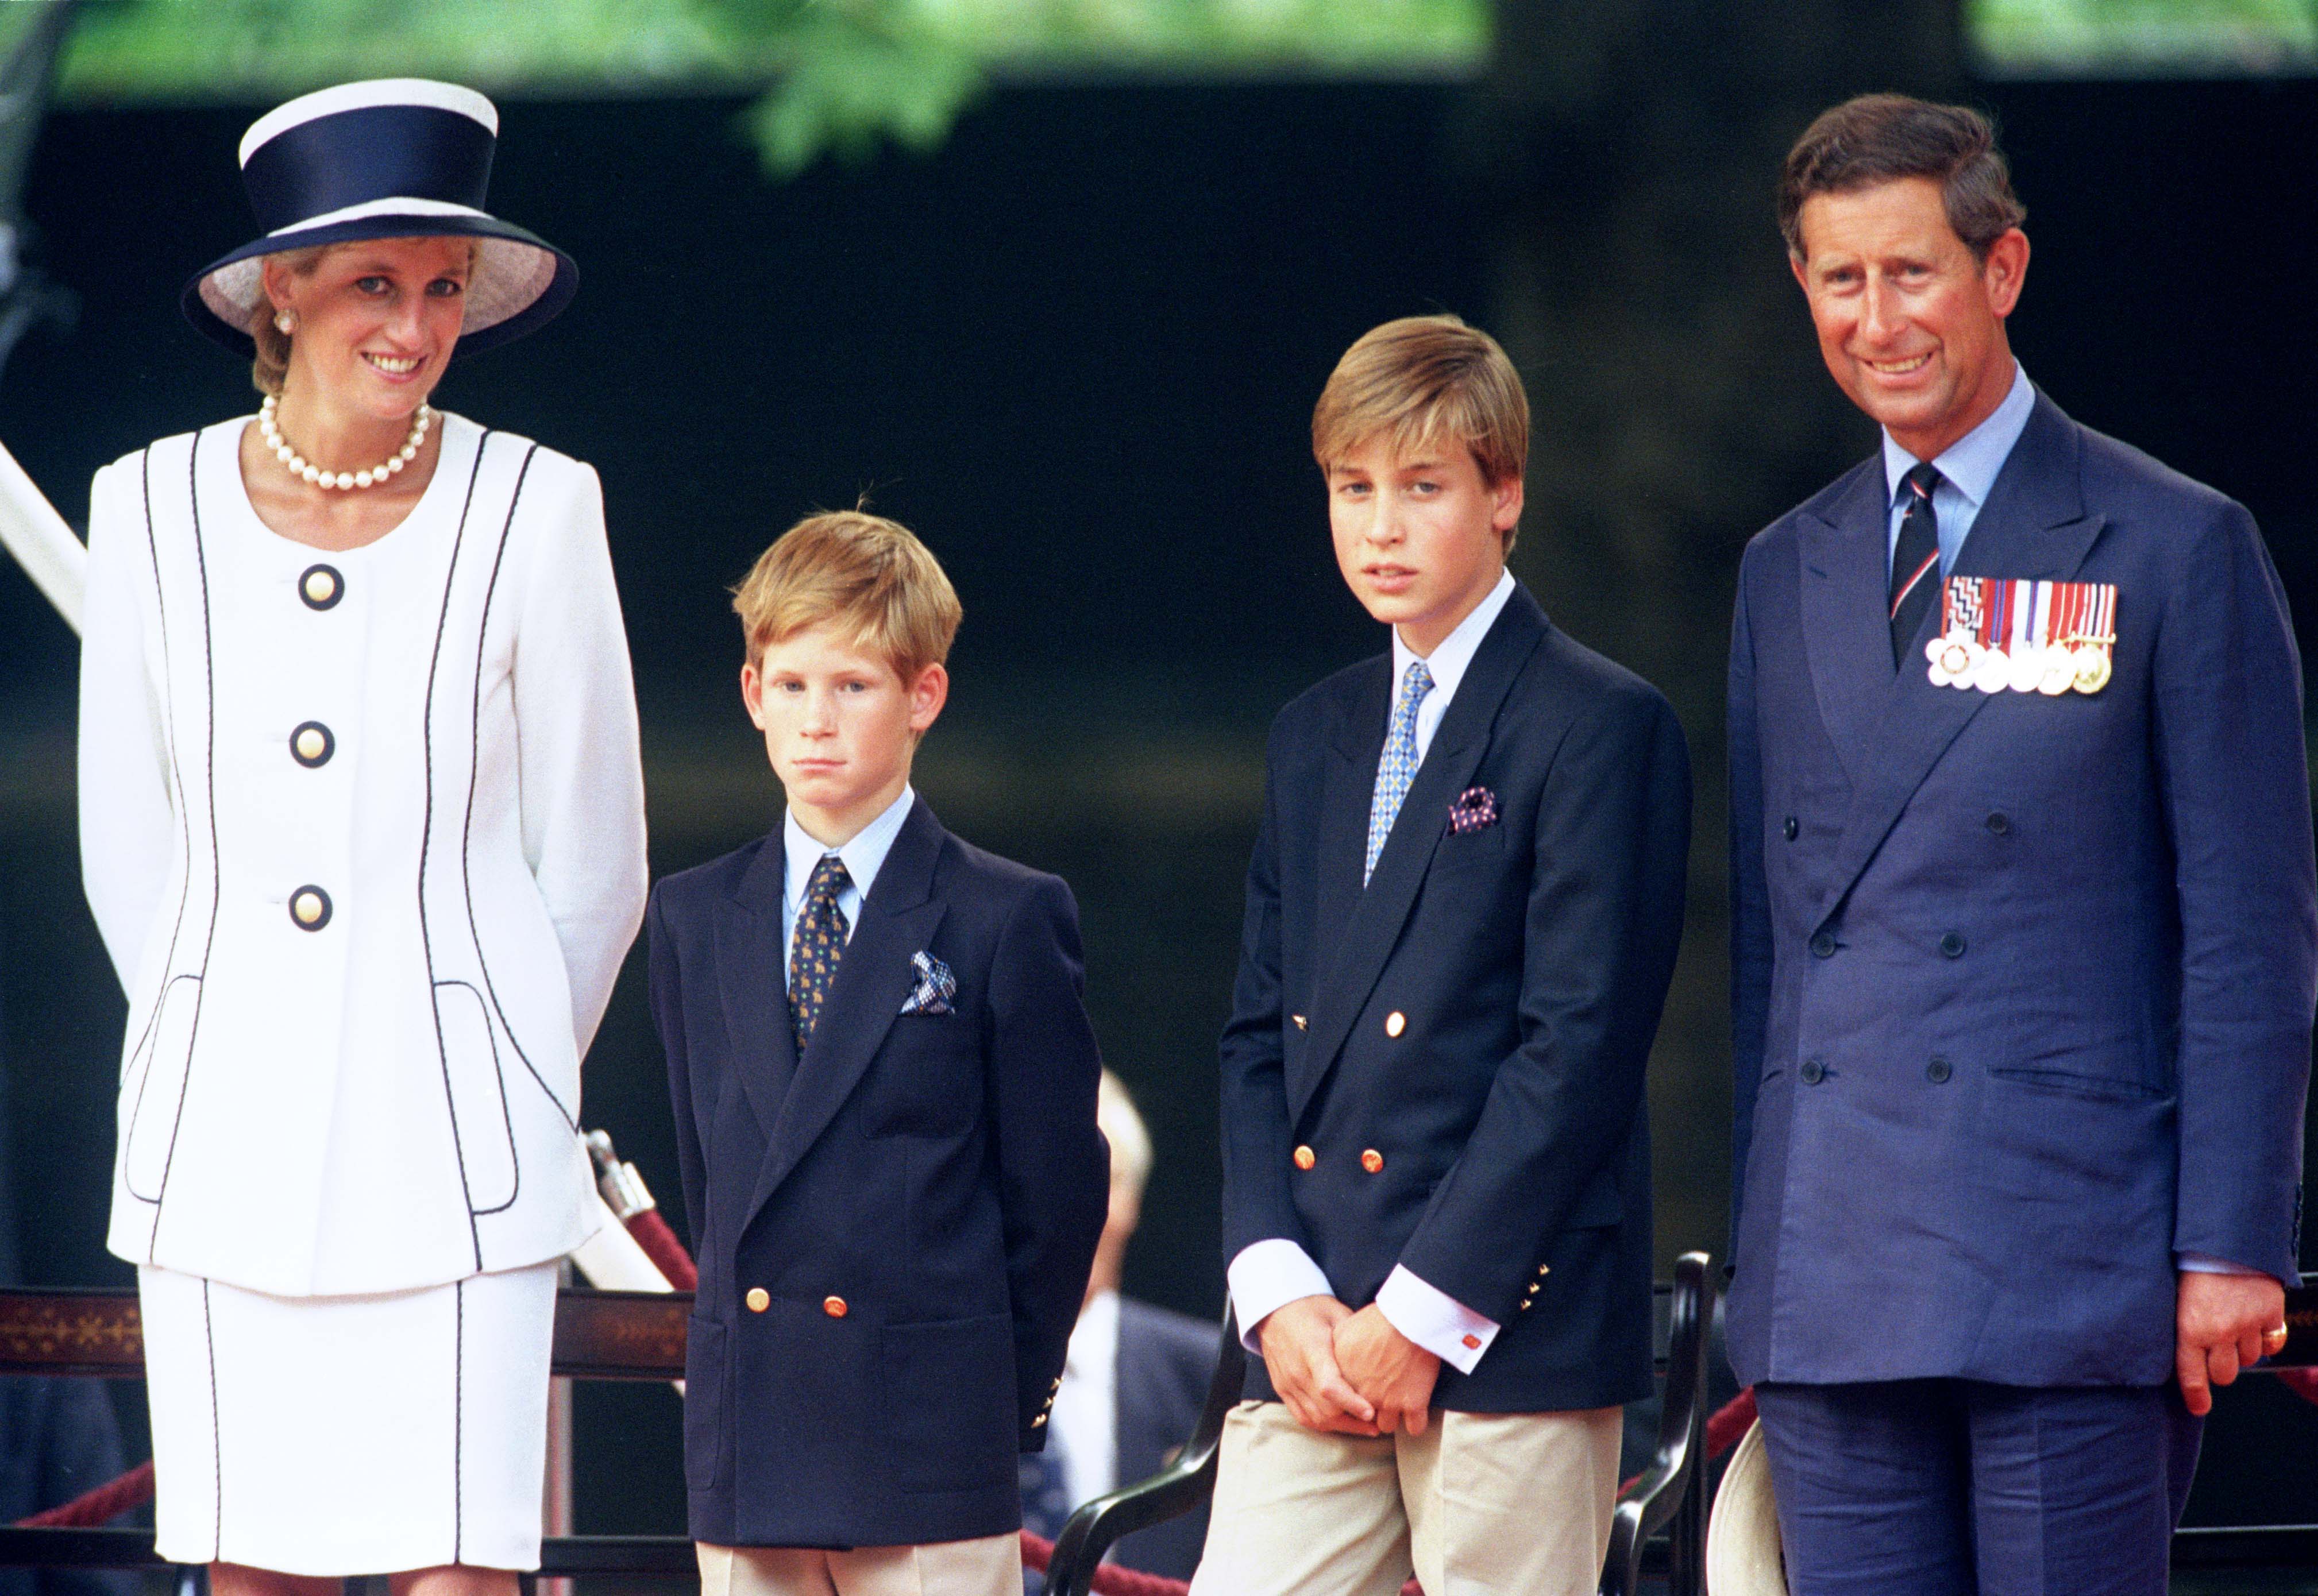 Prince Charles and Princess Diana, of Wales, Princes William and Prince Harry at The VJ Day 50Th Anniversary Celebrations, London. | Photo: Getty Images